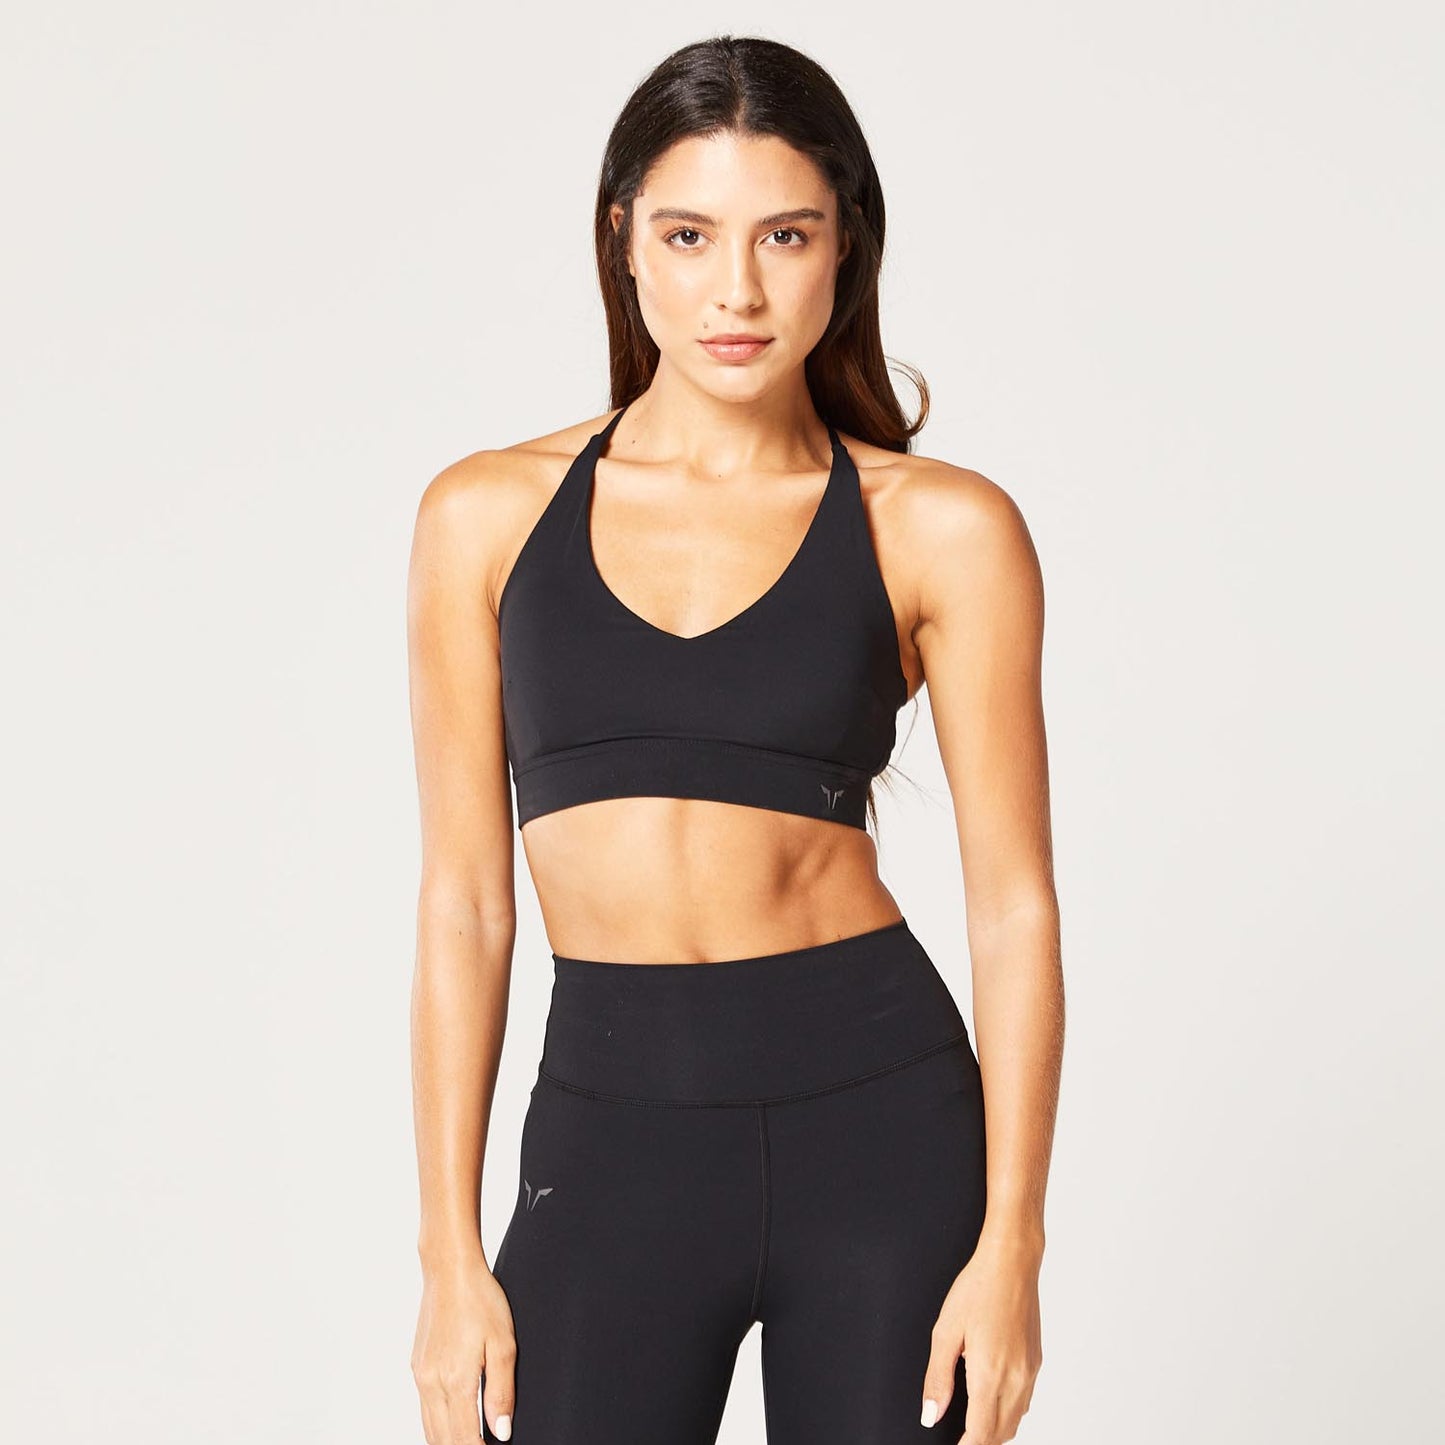 squatwolf-workout-clothes-code-live-in-bra-black-sports-bra-for-gym